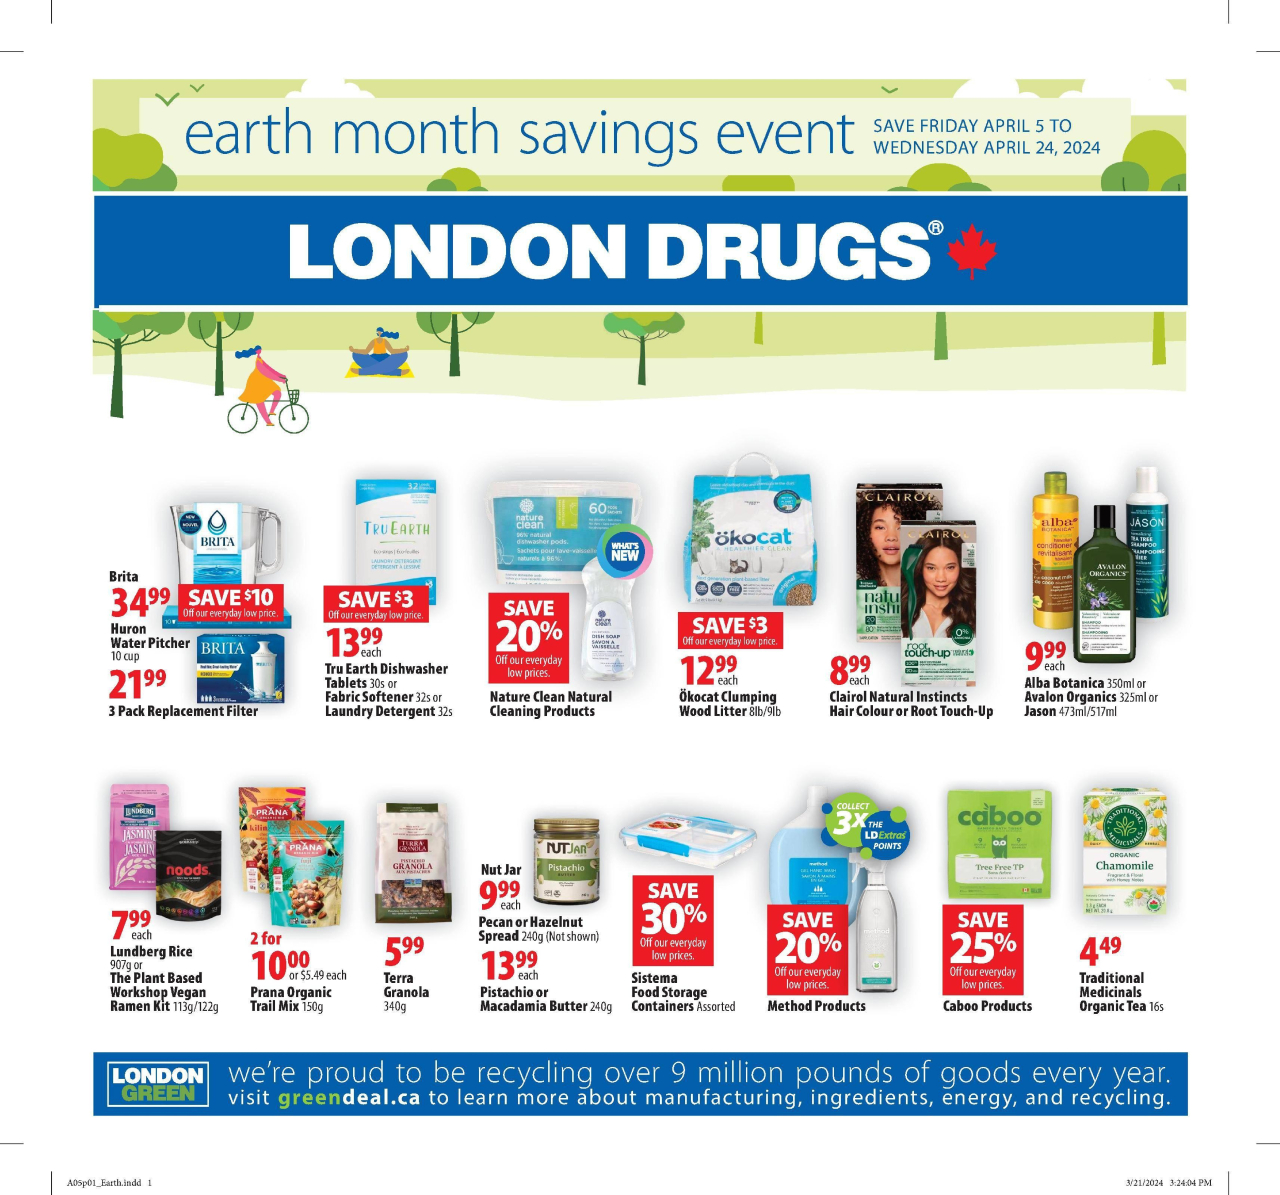 London Drugs Flyer - Earth Month Event from Apr. 5, 2024